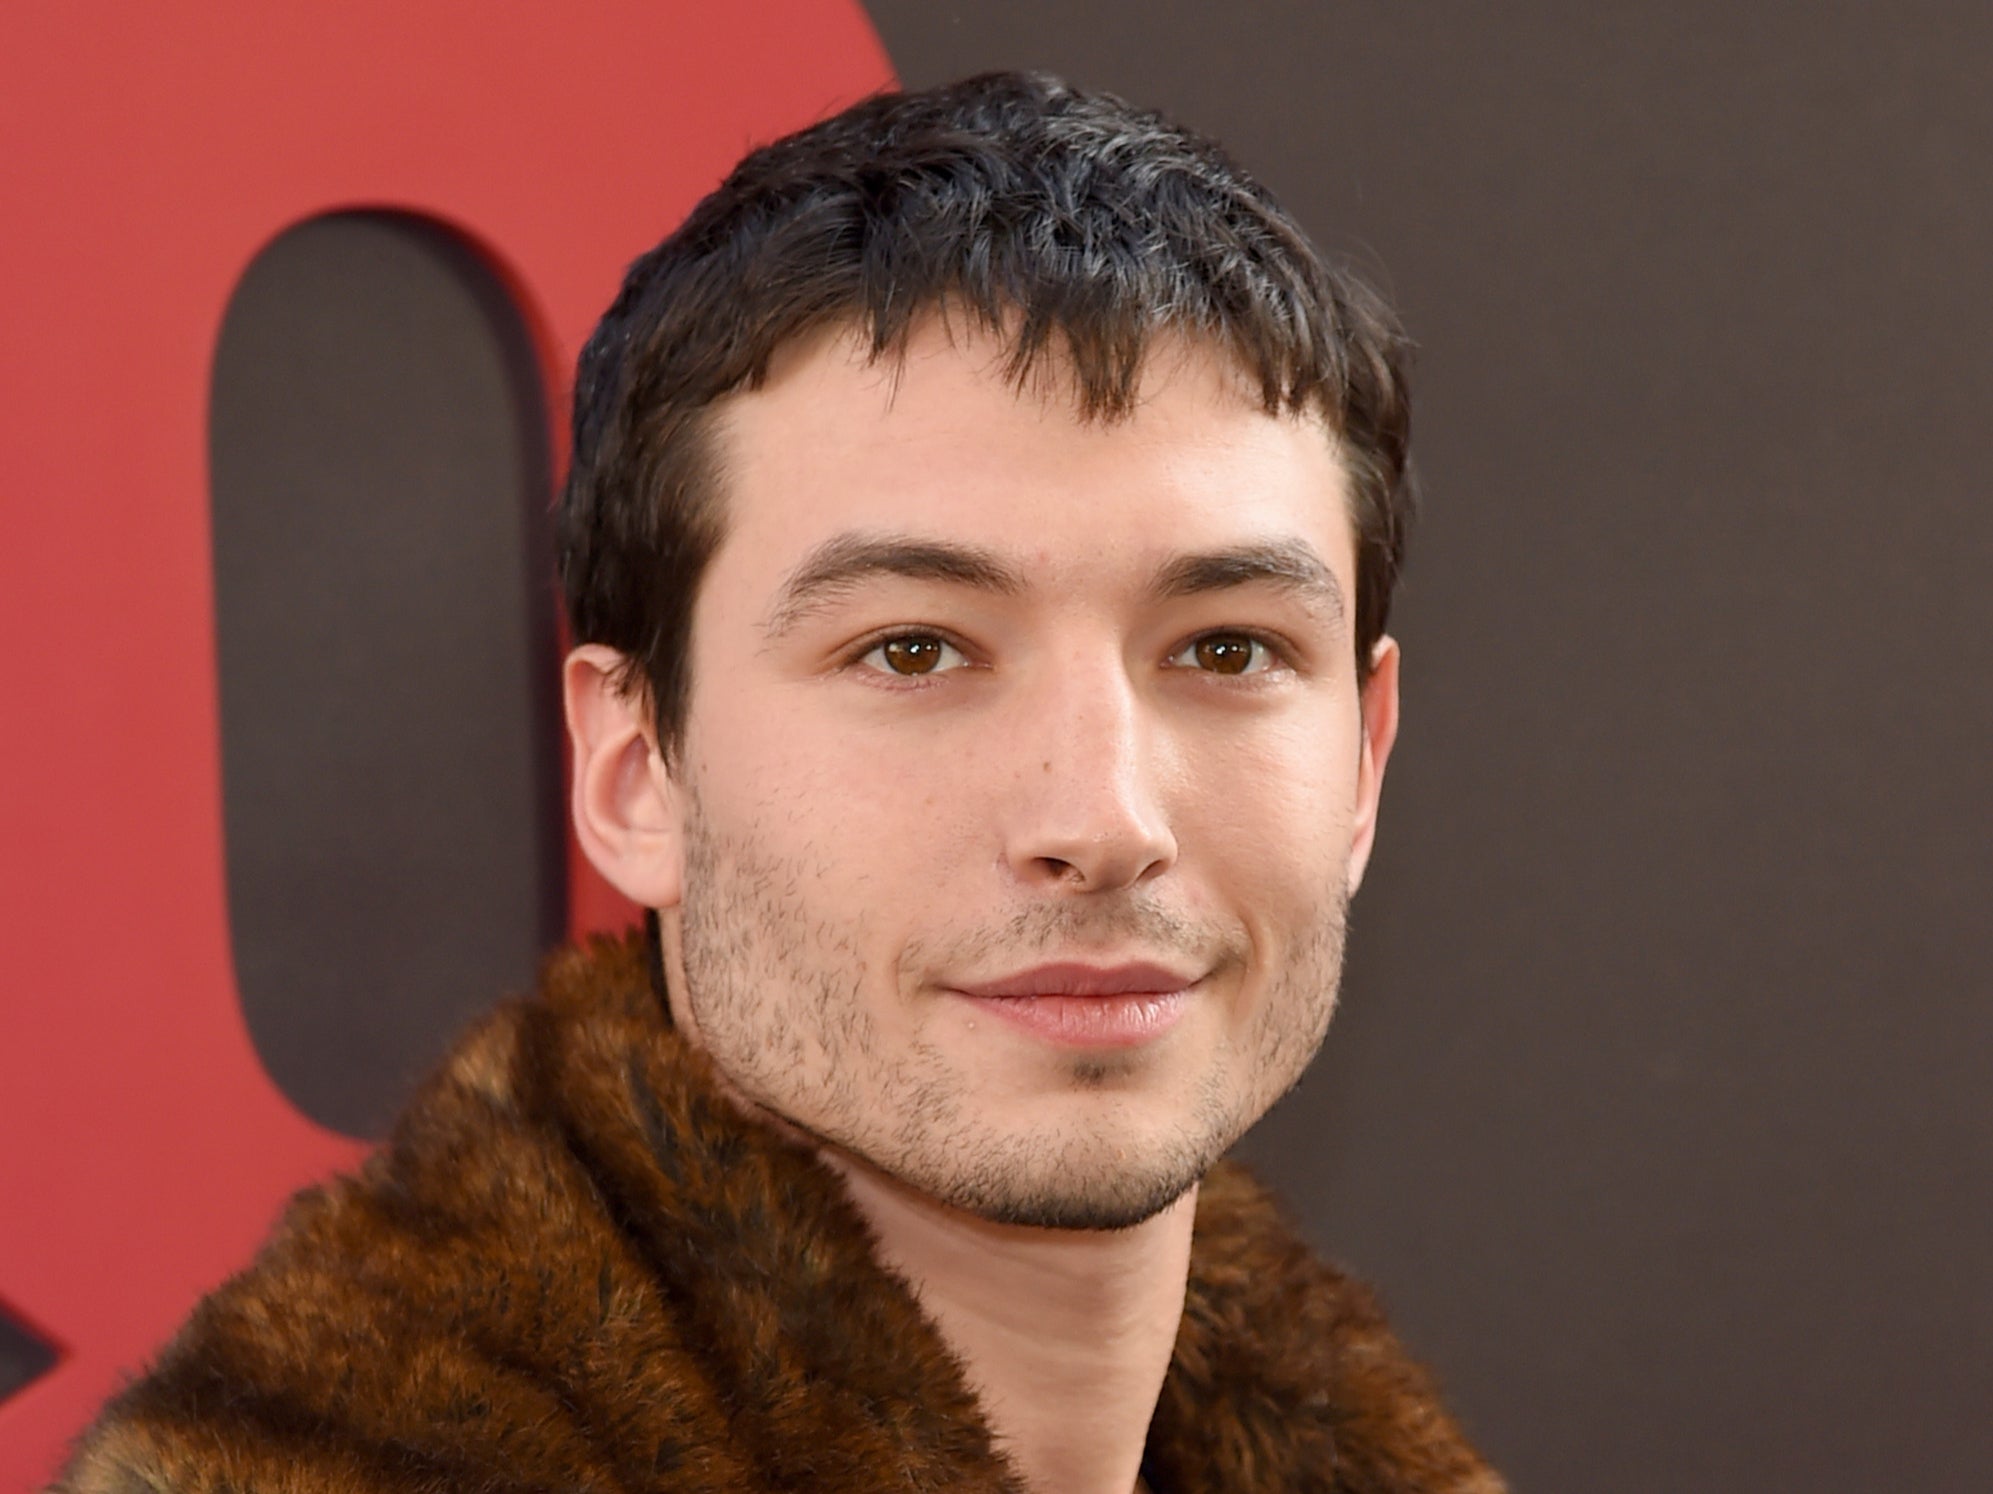 independent.co.uk - Louis Chilton - Ezra Miller accused of music theft by two musicians